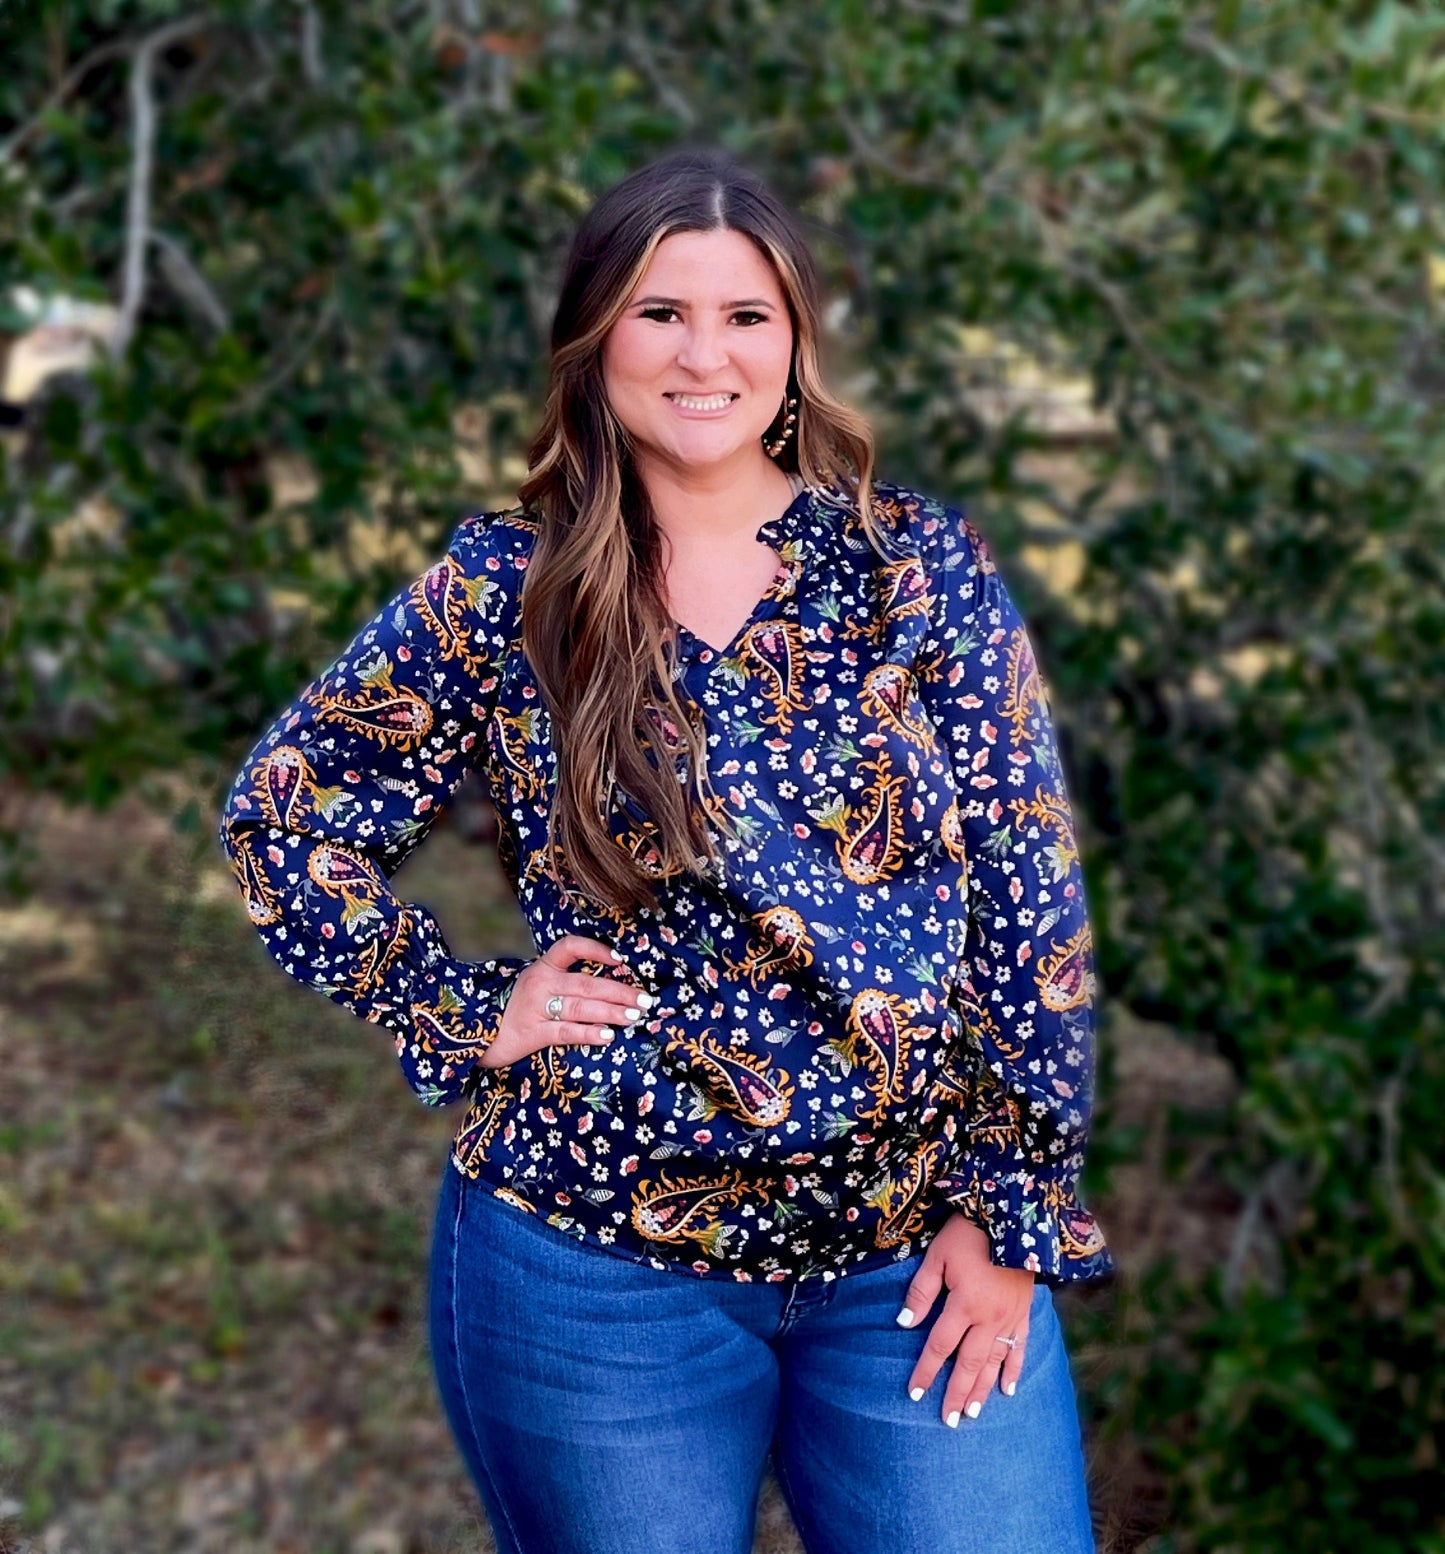 When paisley print meets chic! The Alli top by Washco Apparel includes a gorgeous paisley print, a notched v-neckline and silky detail. Alli makes a great top for work or play!